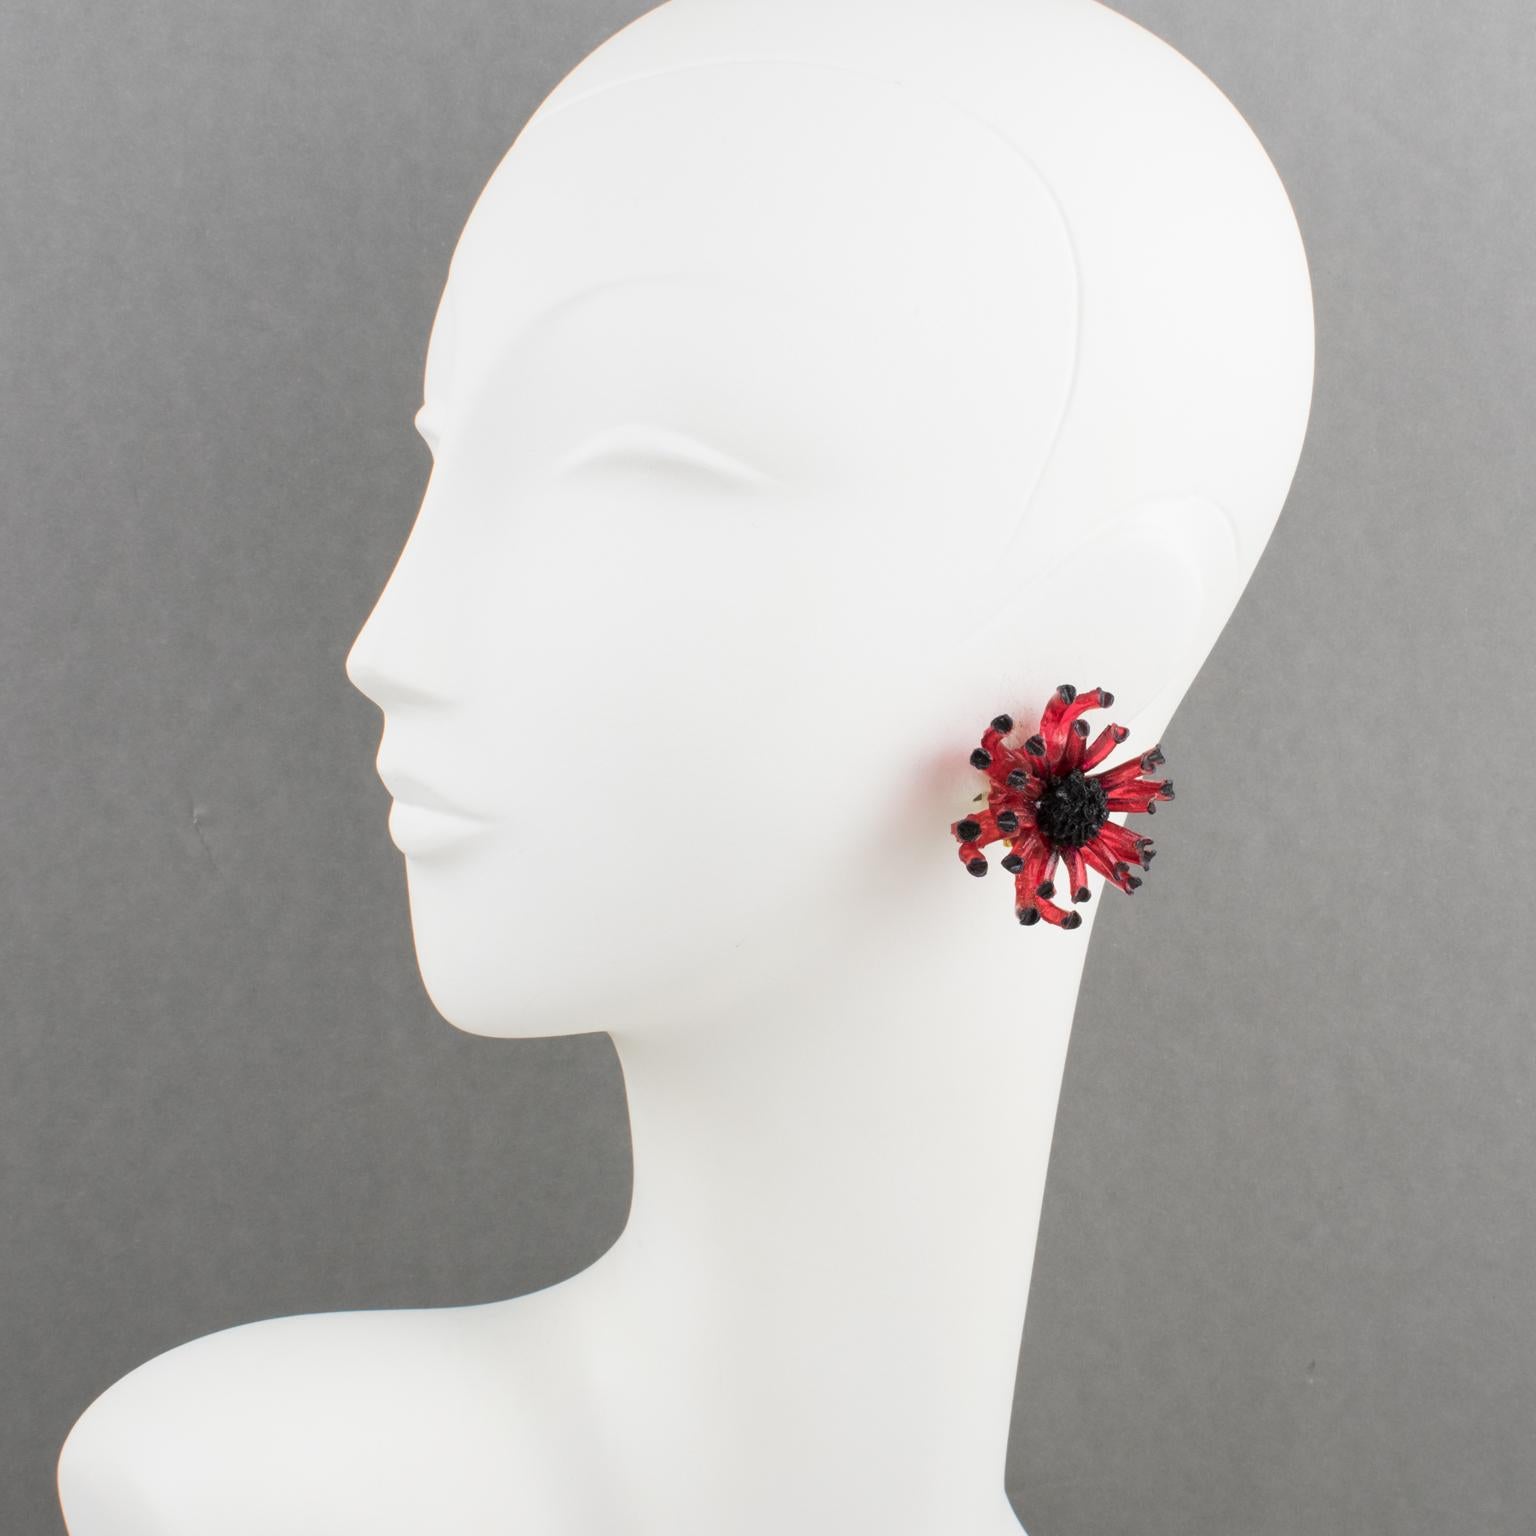 Stunning French Jewelry Designer Francoise Montague Paris clip-on earrings. Dimensional anemone flower shape with raspberry red and black resin. There is no visible maker's mark since none of Montague's vintage resin jewelry is signed.
Measurements: